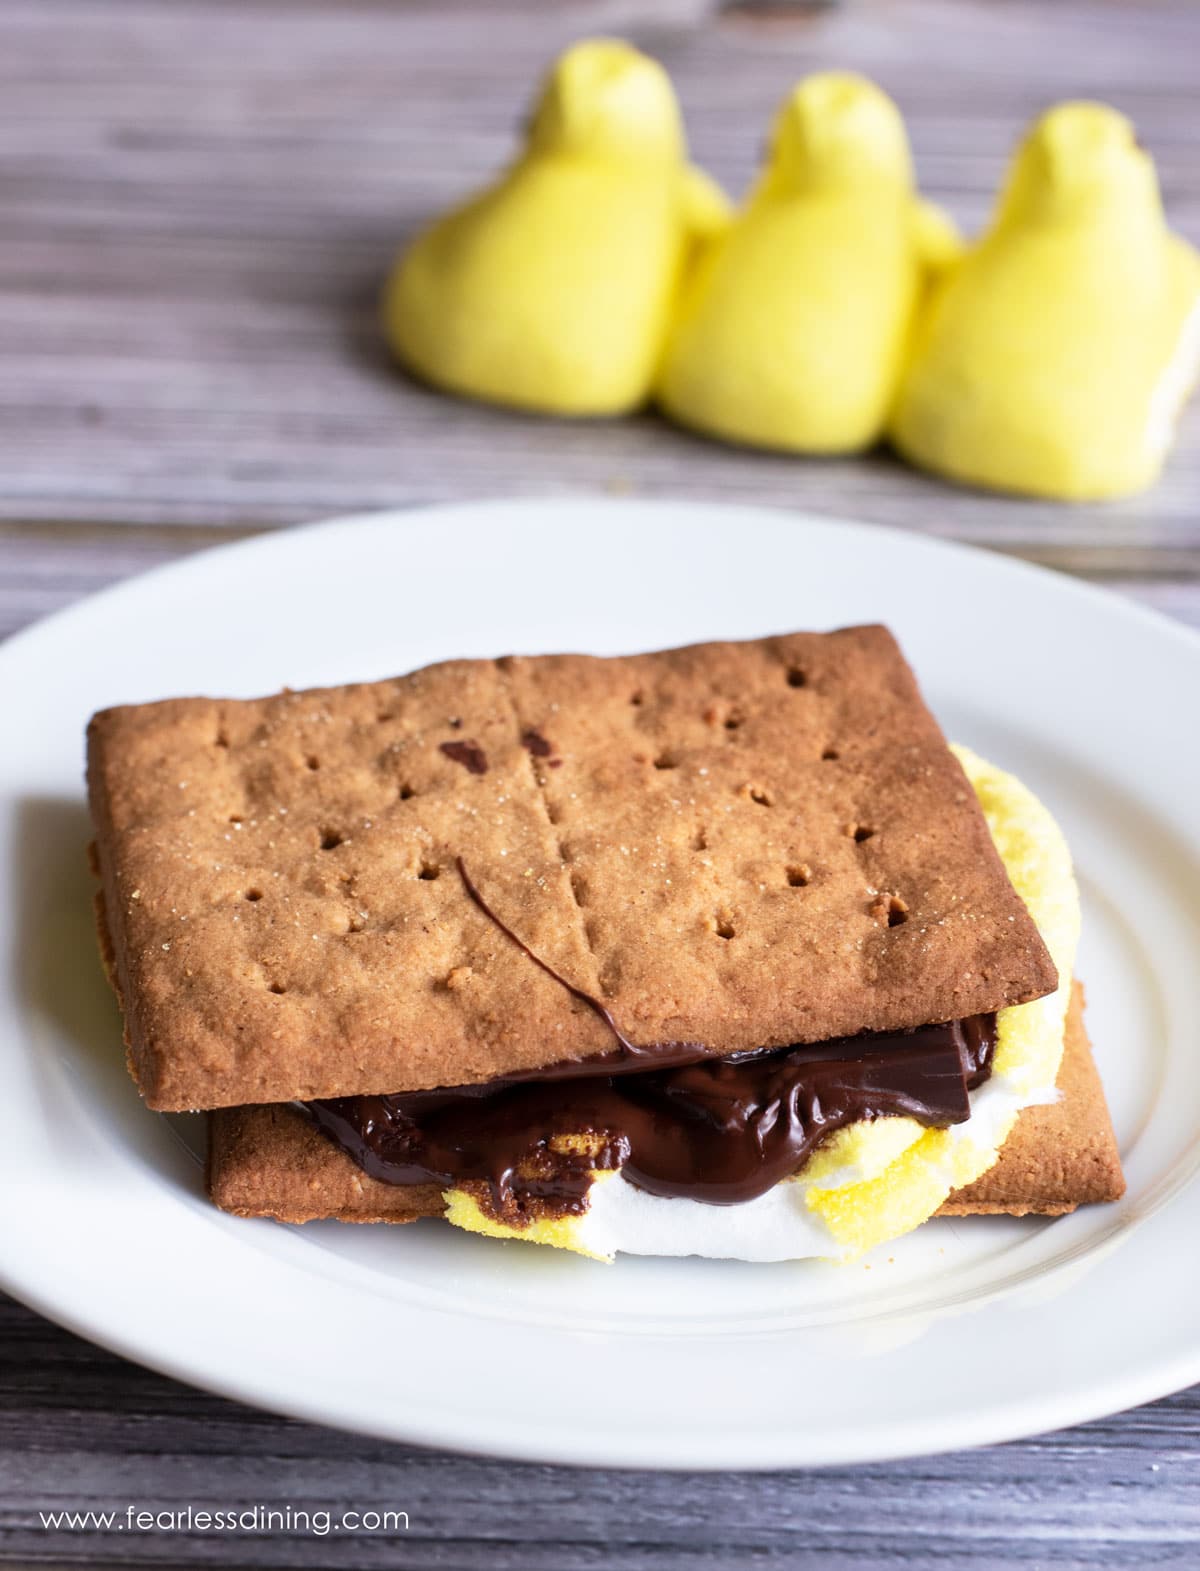 a s'mores made with a yellow Easter peep